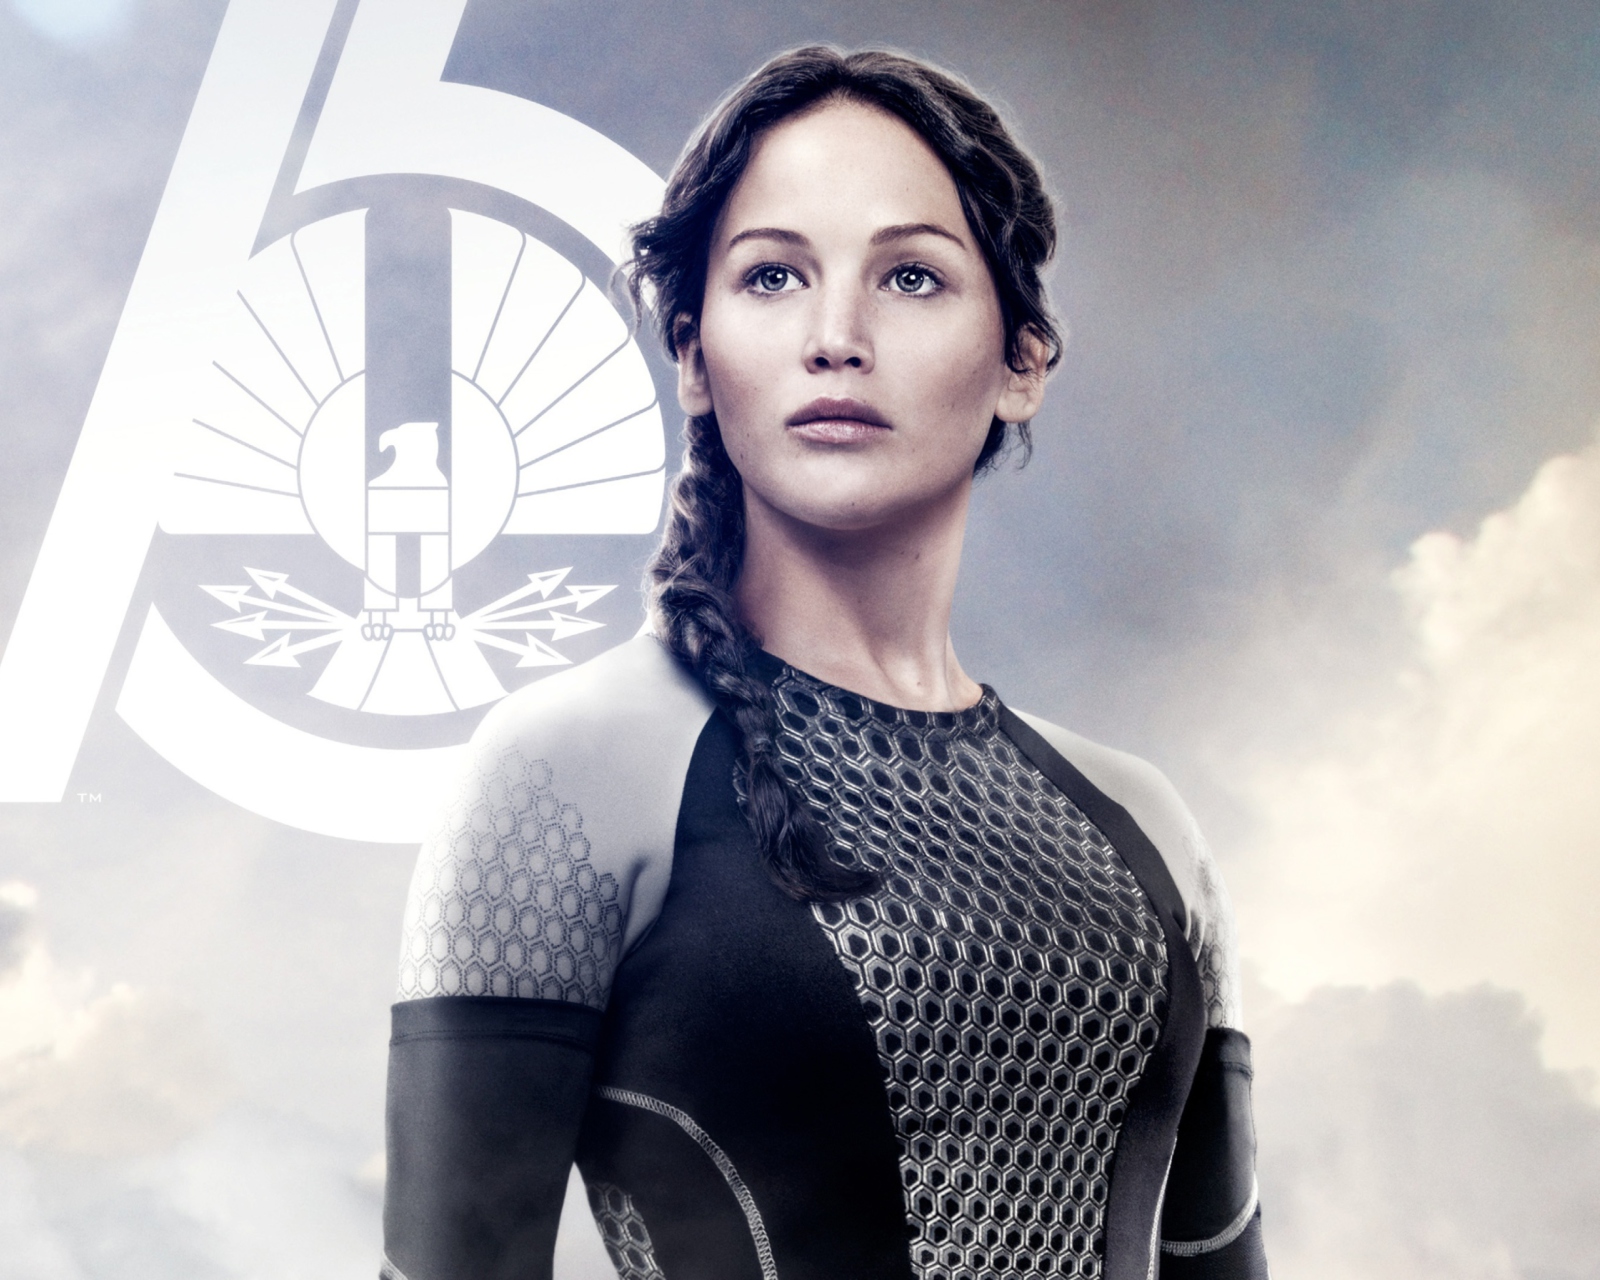 Jennifer Lawrence In The Hunger Games Catching Fire screenshot #1 1600x1280